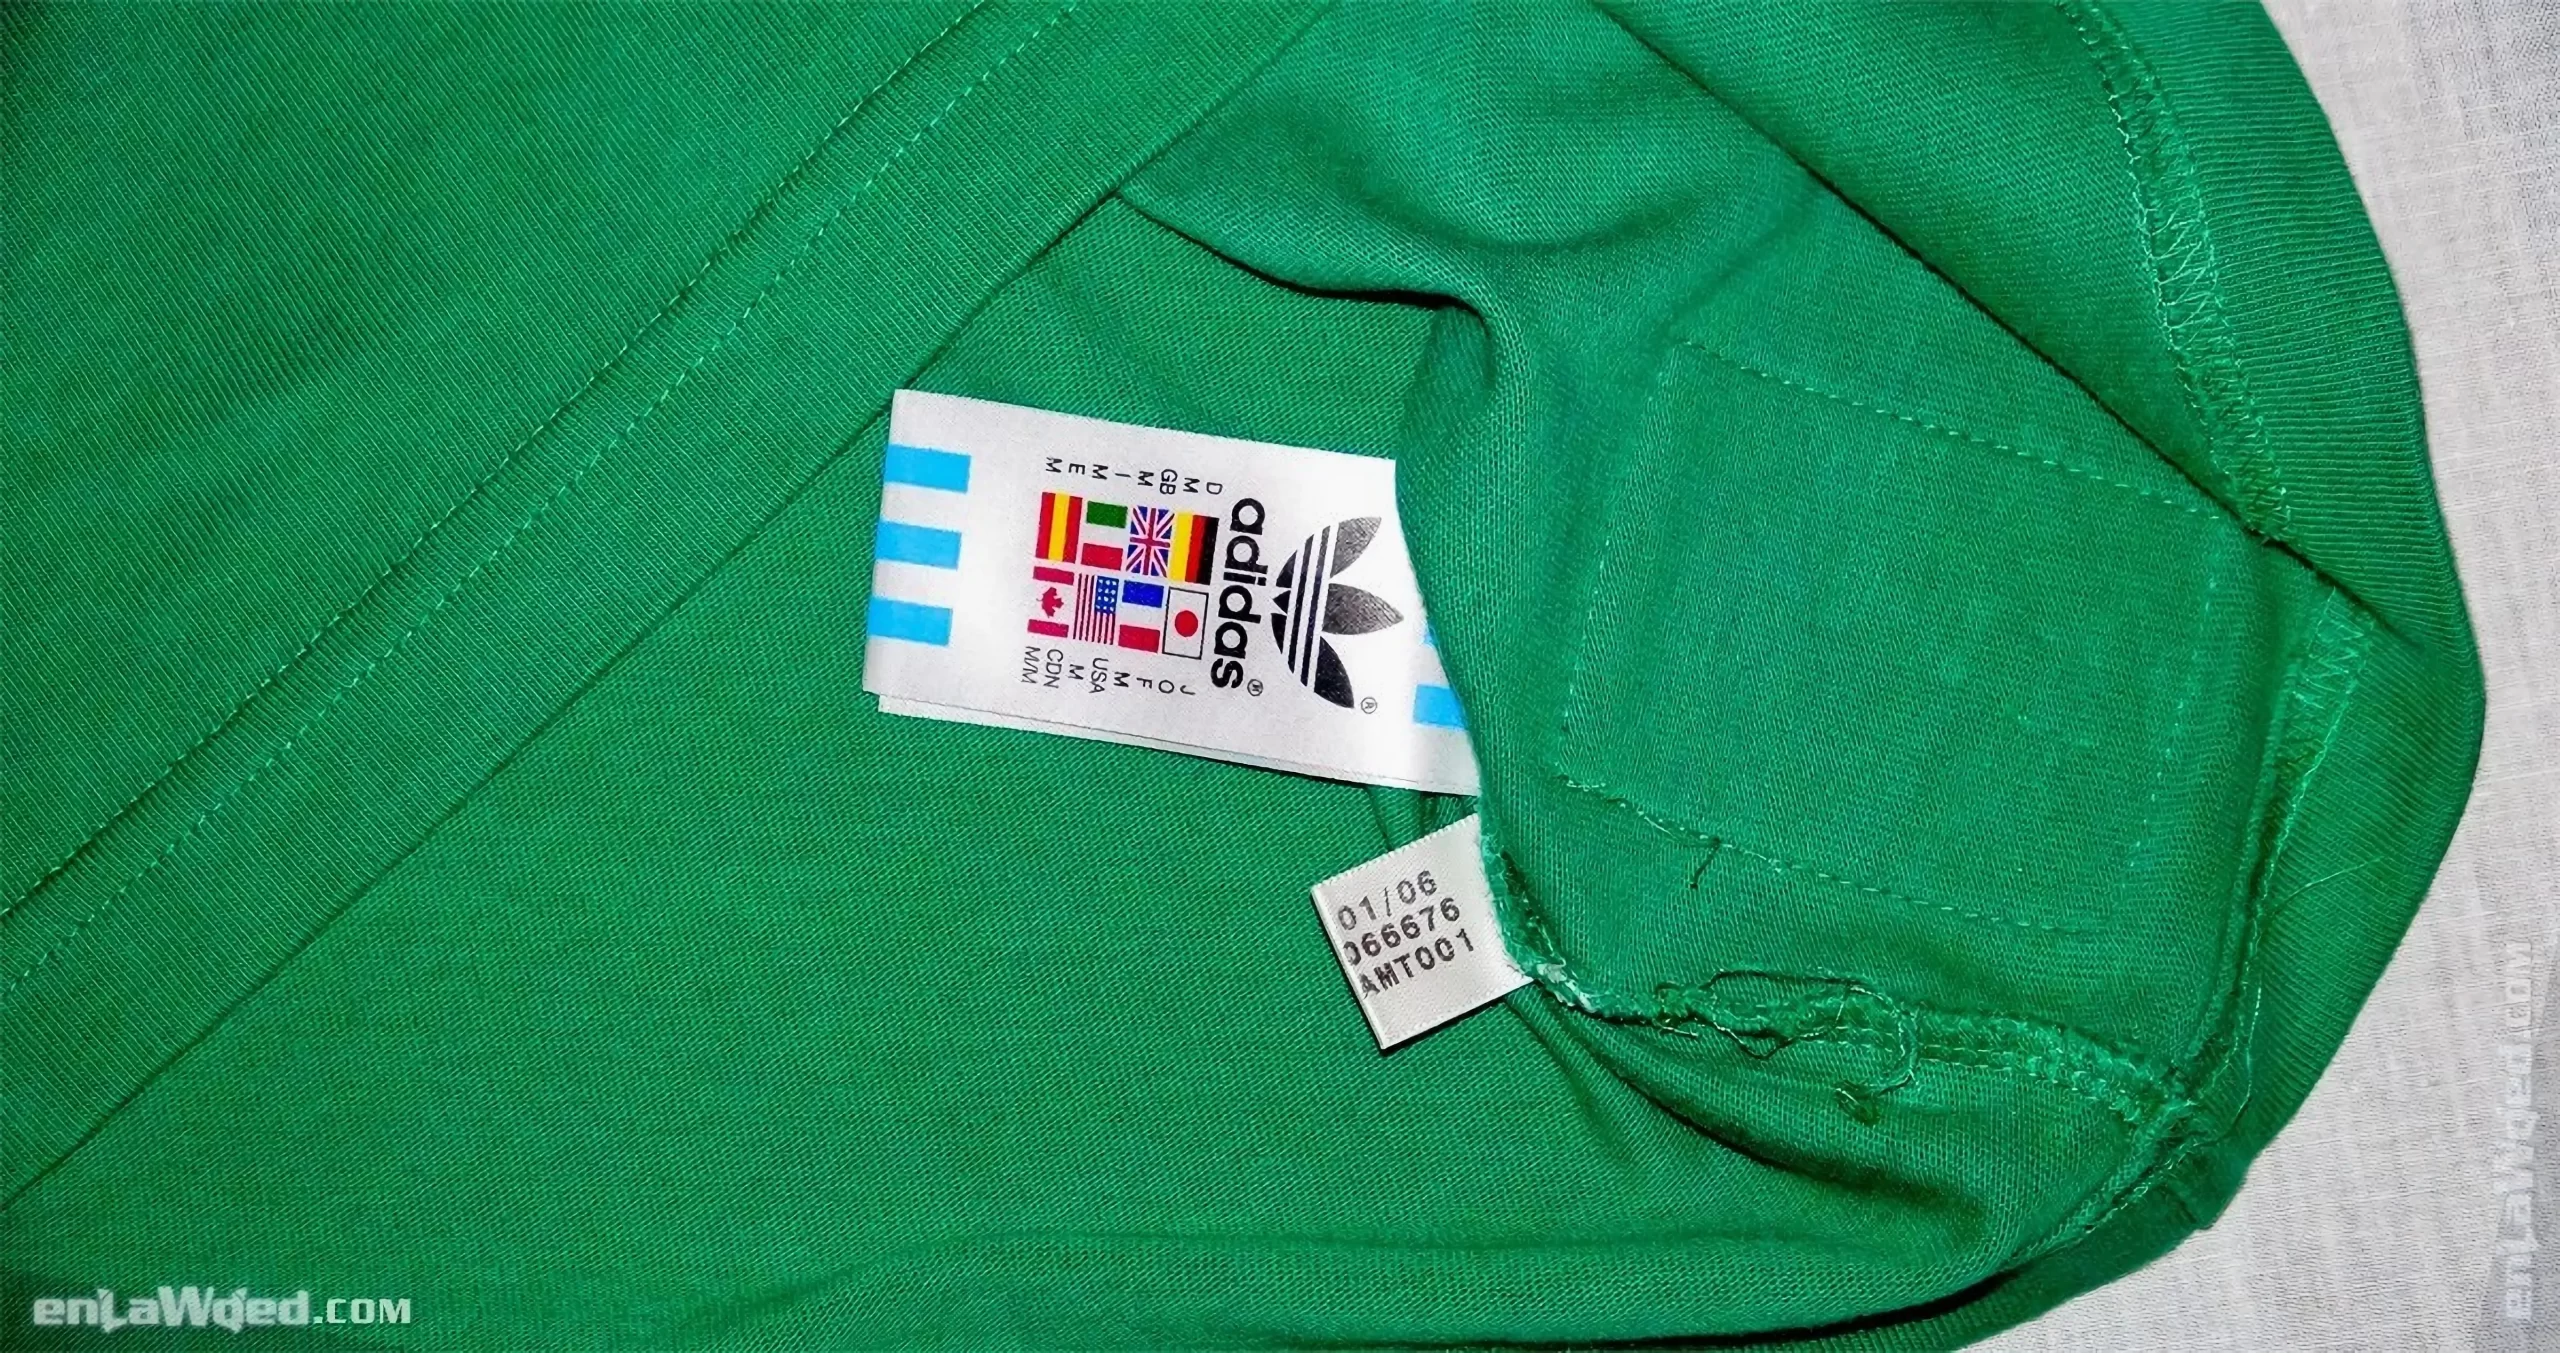 Adidas tag of the Der Bomber t-shirt, with the month and year of fabrication: 01/2006